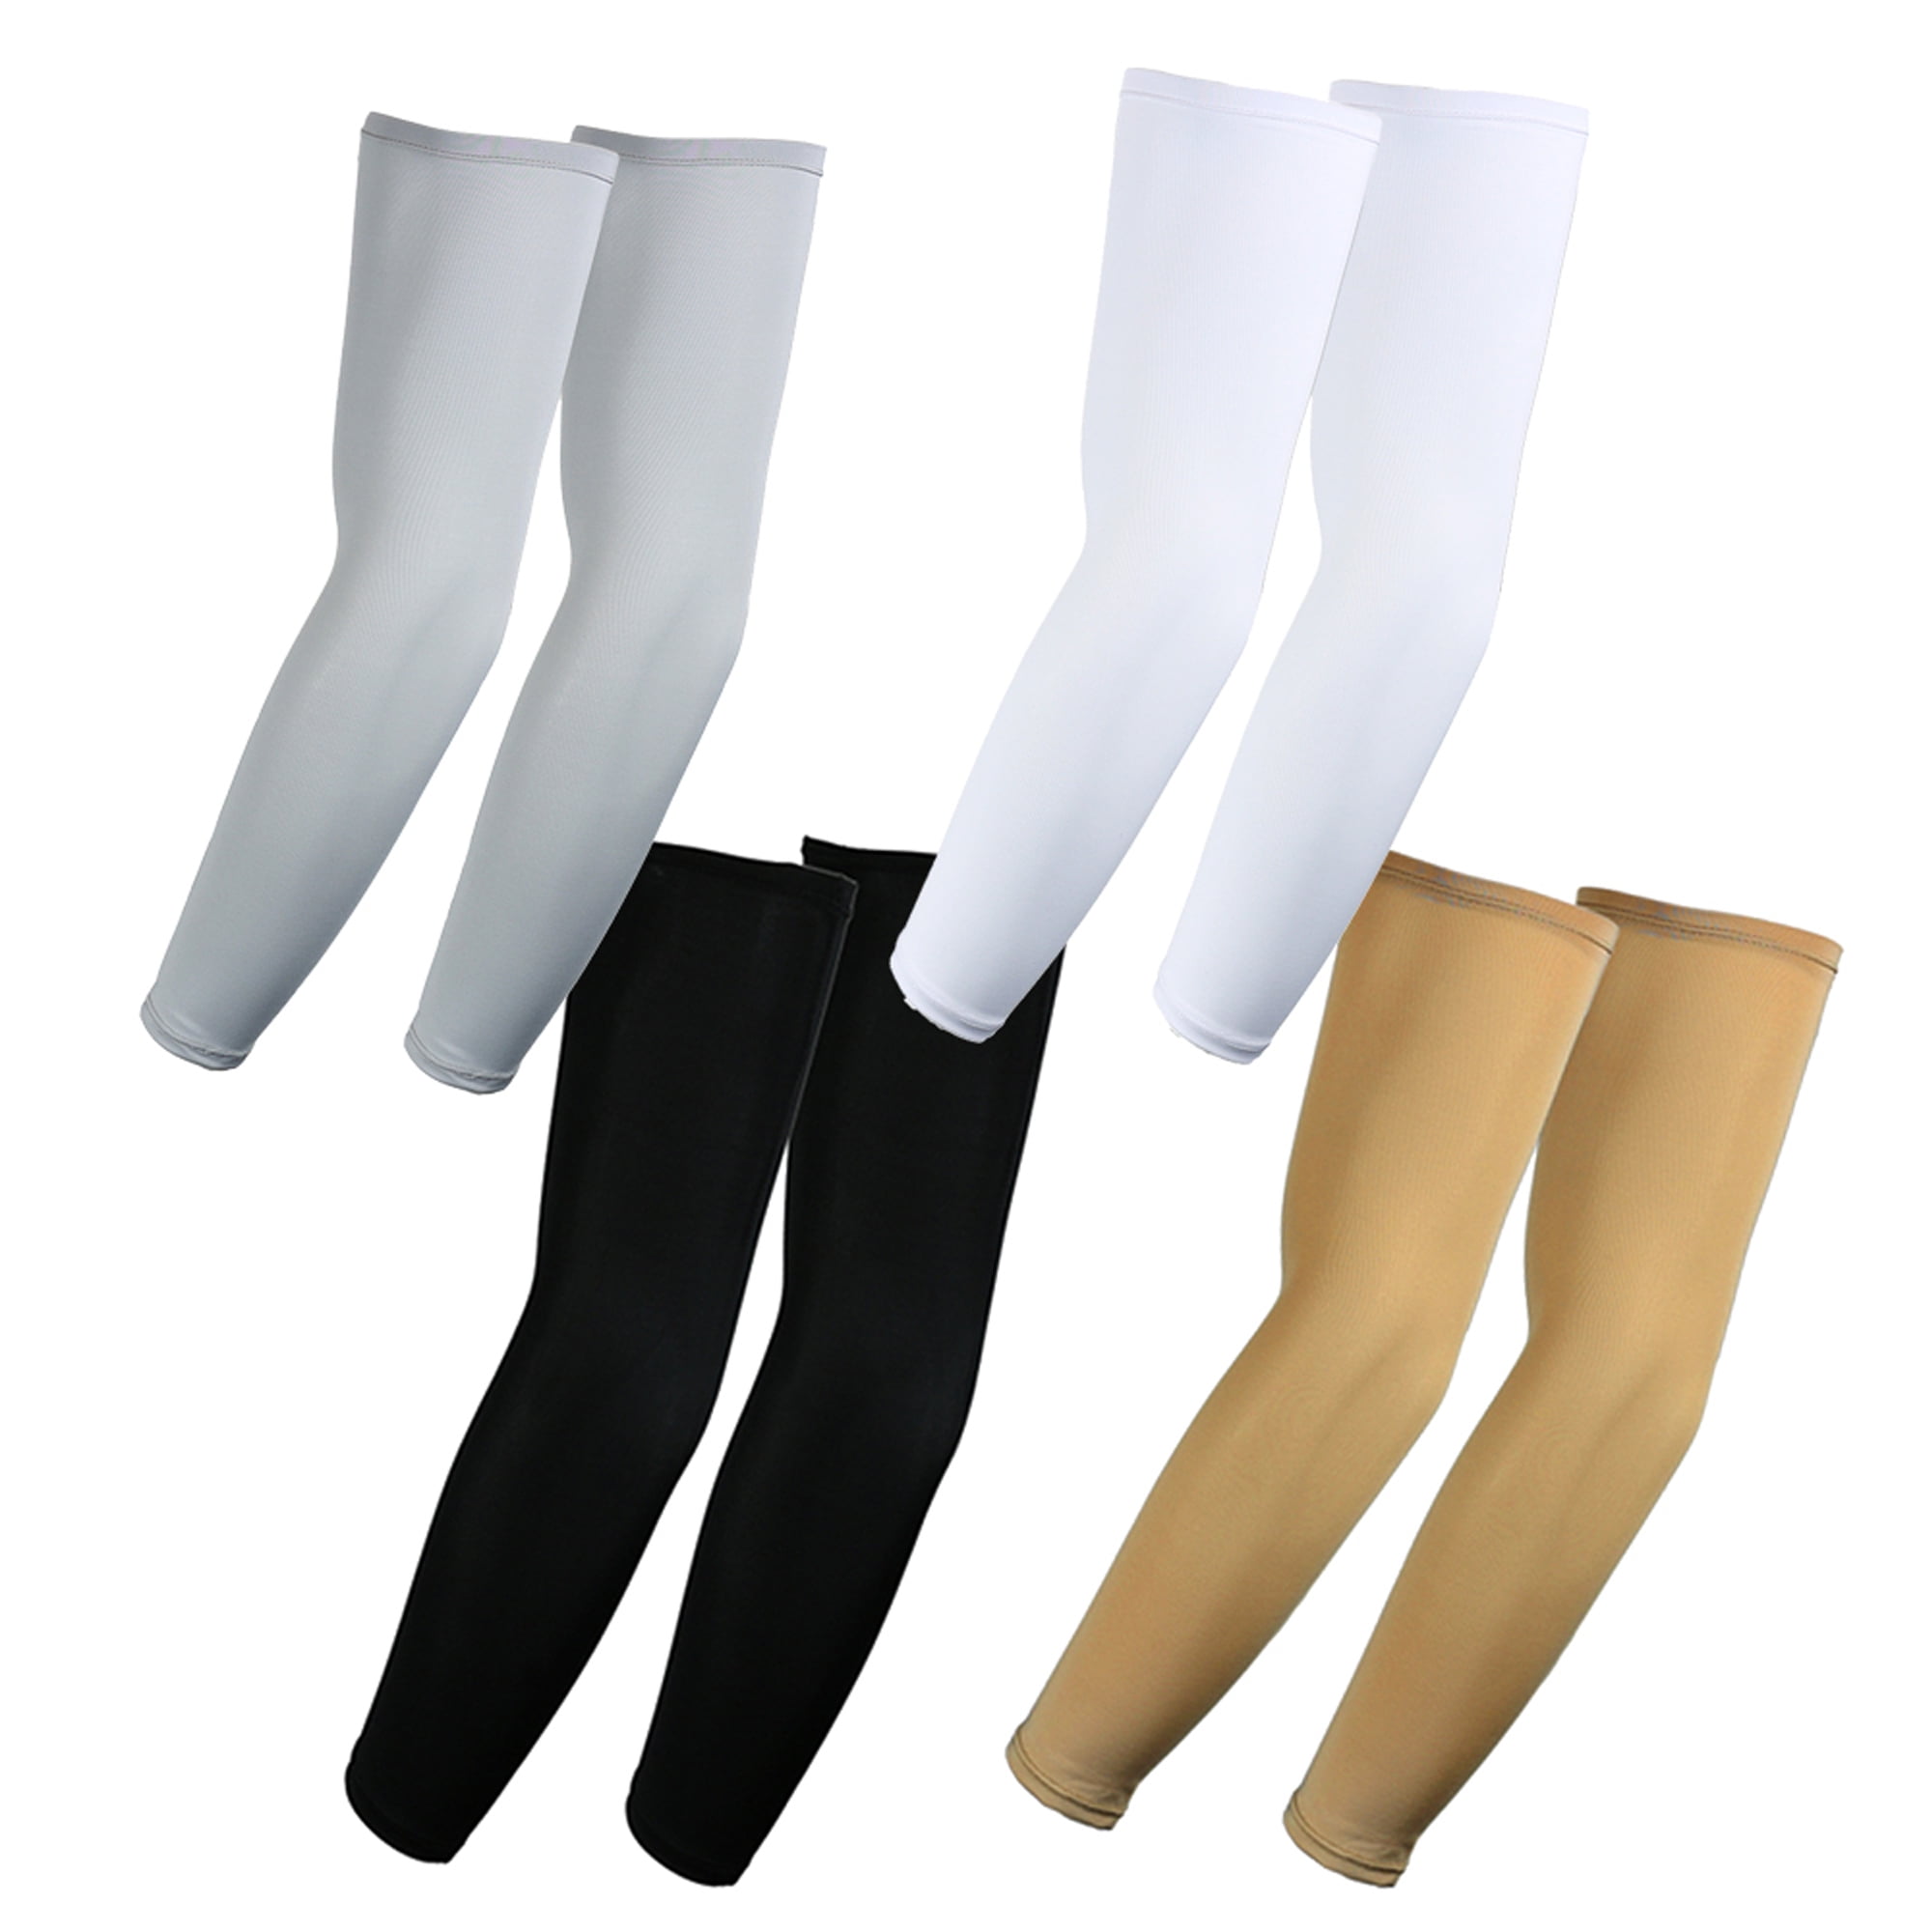 XL 1 Pair Outdoor Sports Arm Sleeves UV Protection Long Arm Cover Sleeve White 